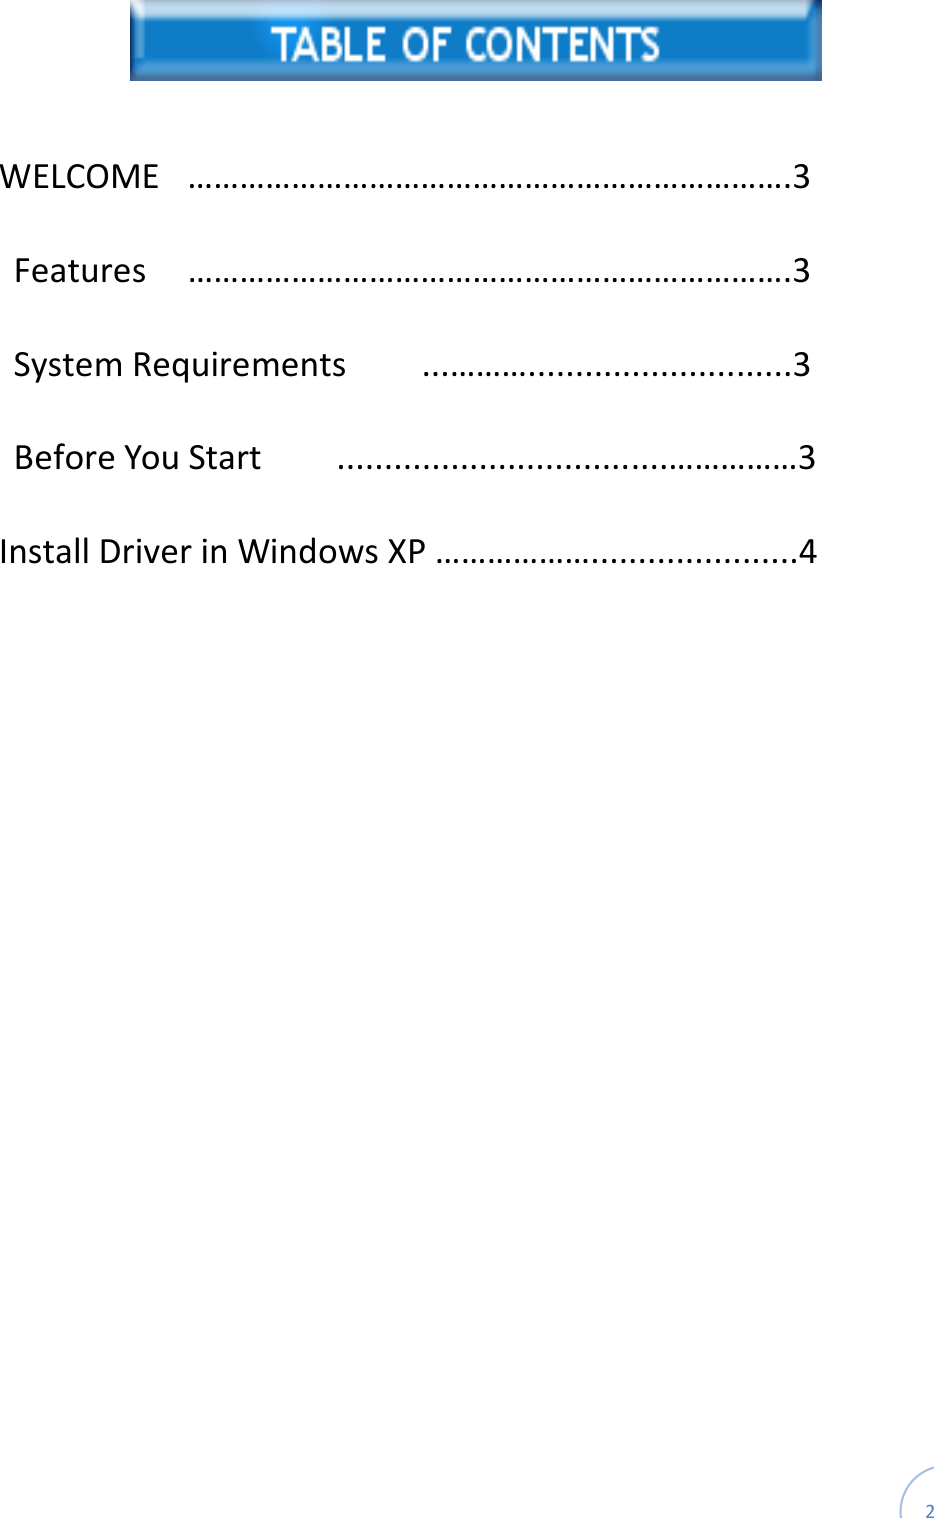  2    WELCOME  …………………………………………………………….3 Features  …………………………………………………………….3 System Requirements        ...………............................3 Before You Start        ...................................……………3 Install Driver in Windows XP ………………......................4    